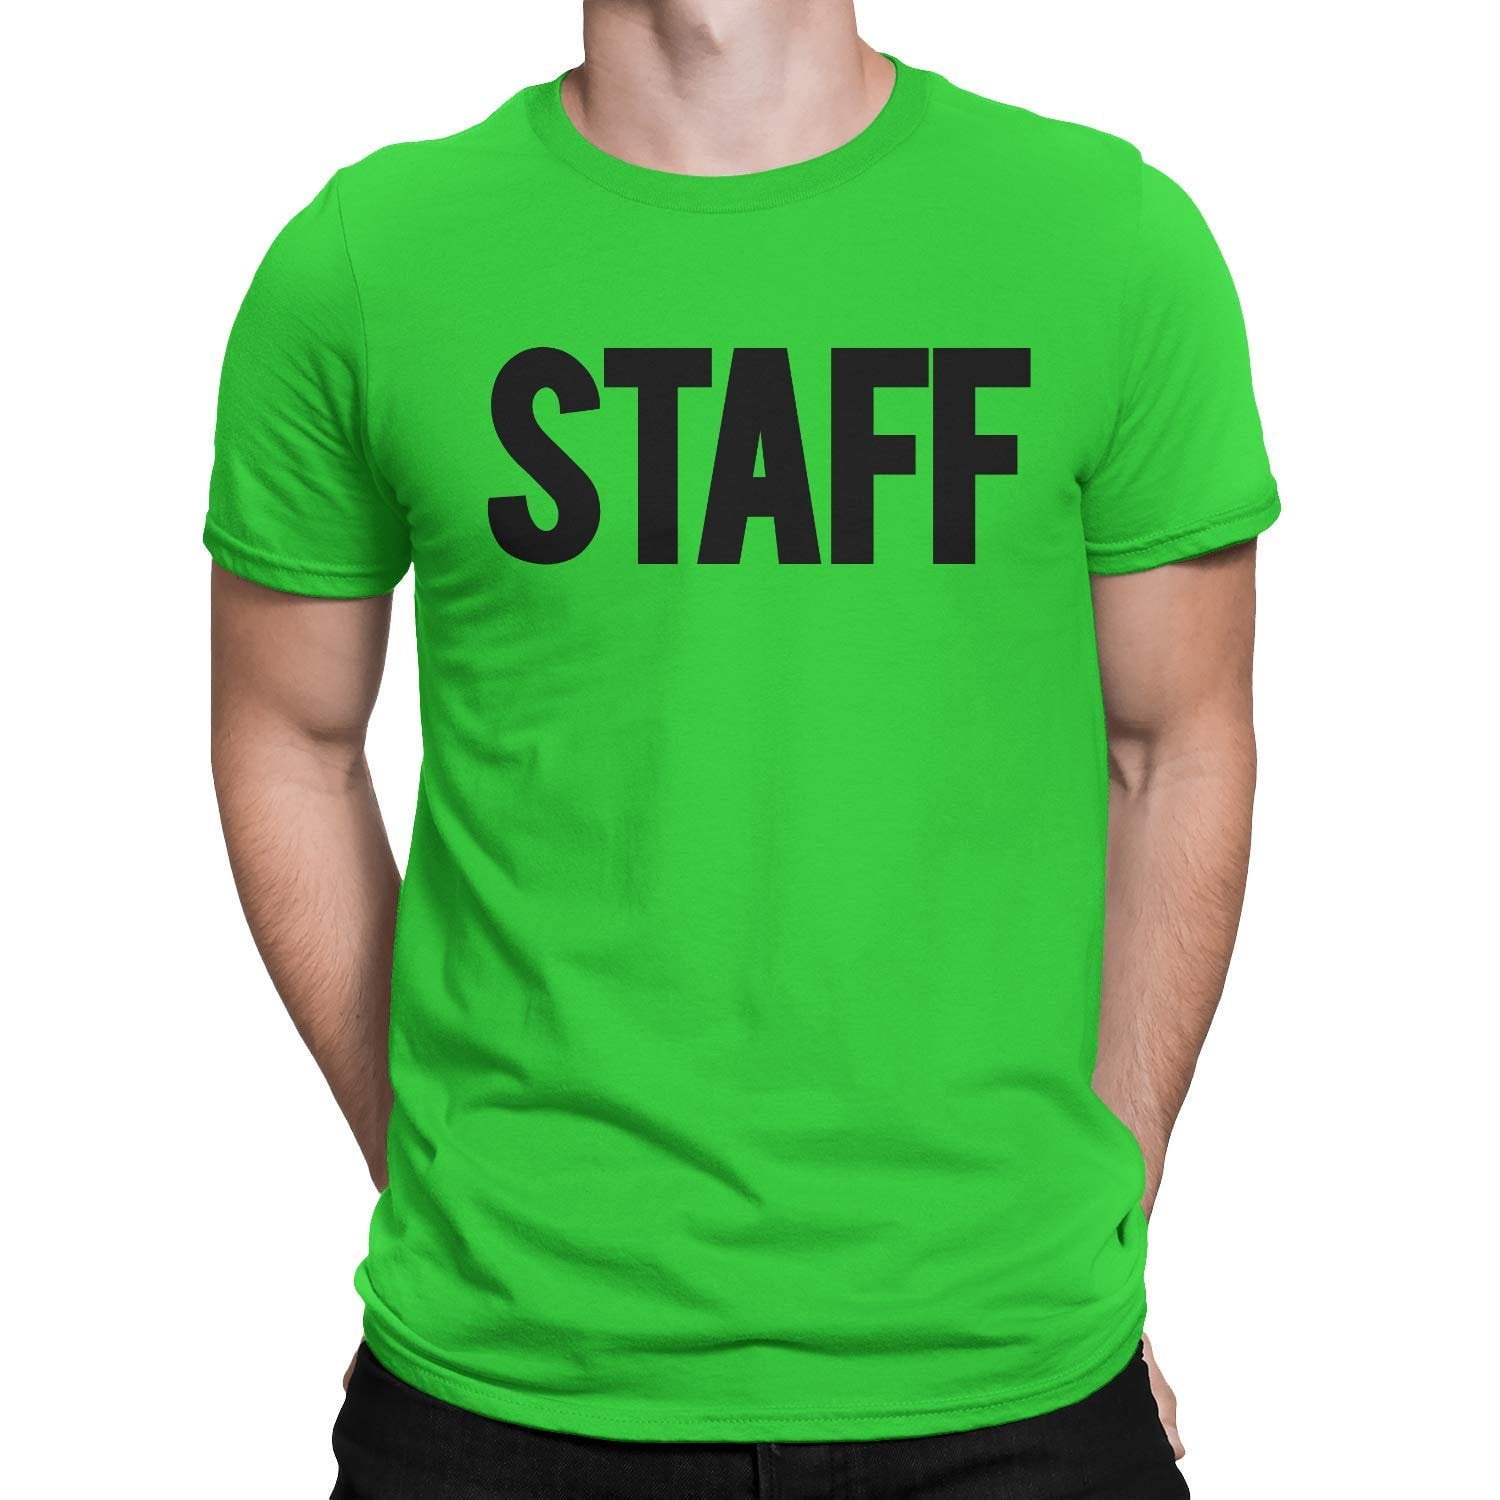 Black-White, 3XL NYC FACTORY Security Polo Shirt Front Back Print Mens Tee Staff Event Uniform Bouncer Screen Printed